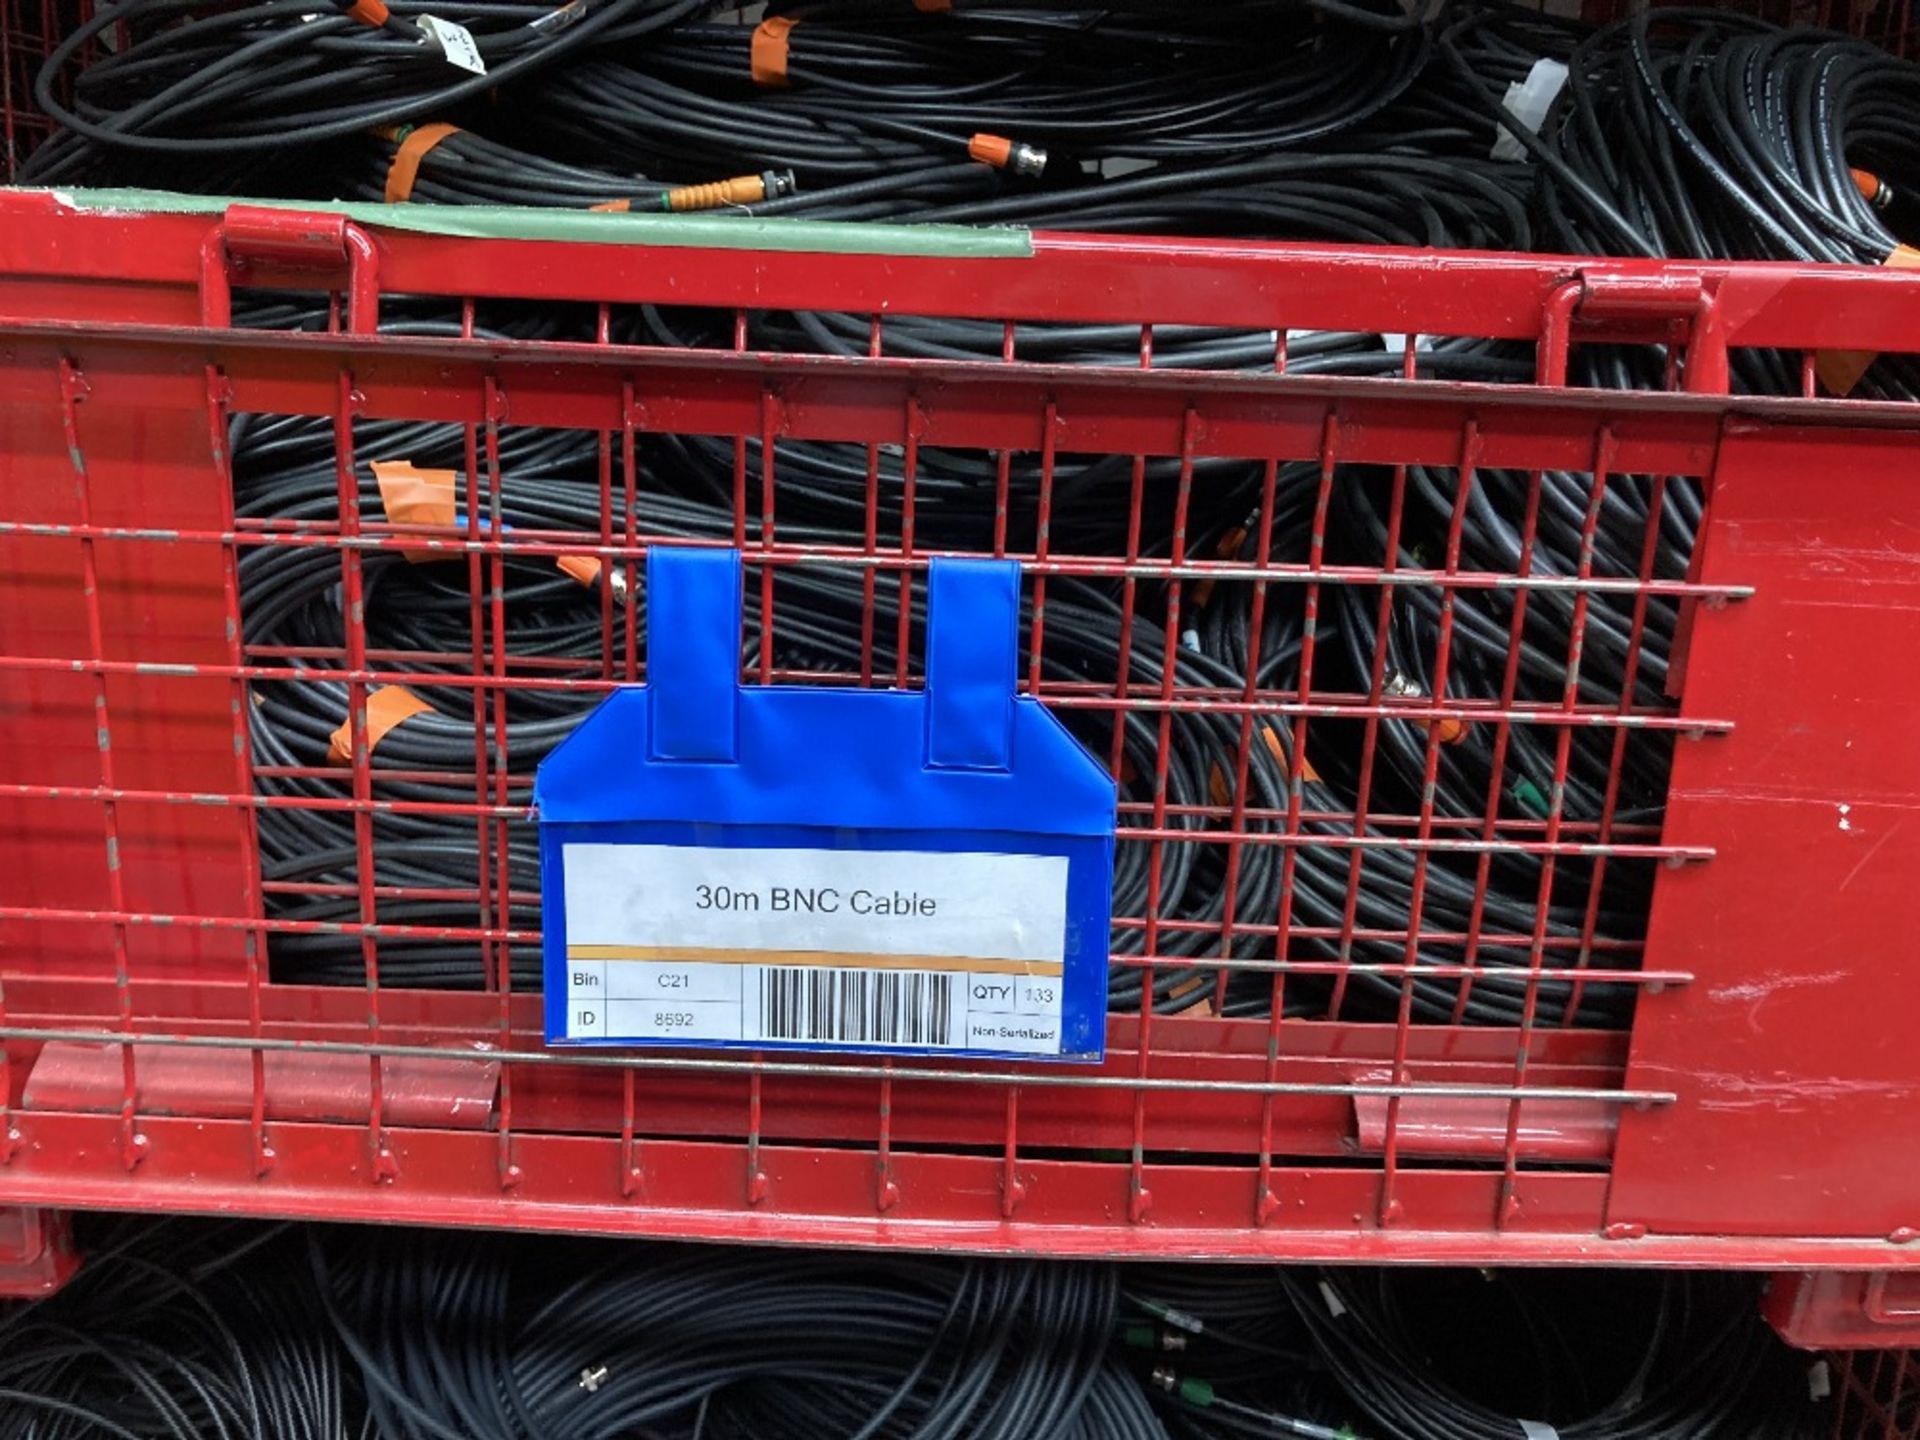 Large Quantity of 30m BNC Cable with Steel Fabricated Stillage - Image 4 of 4